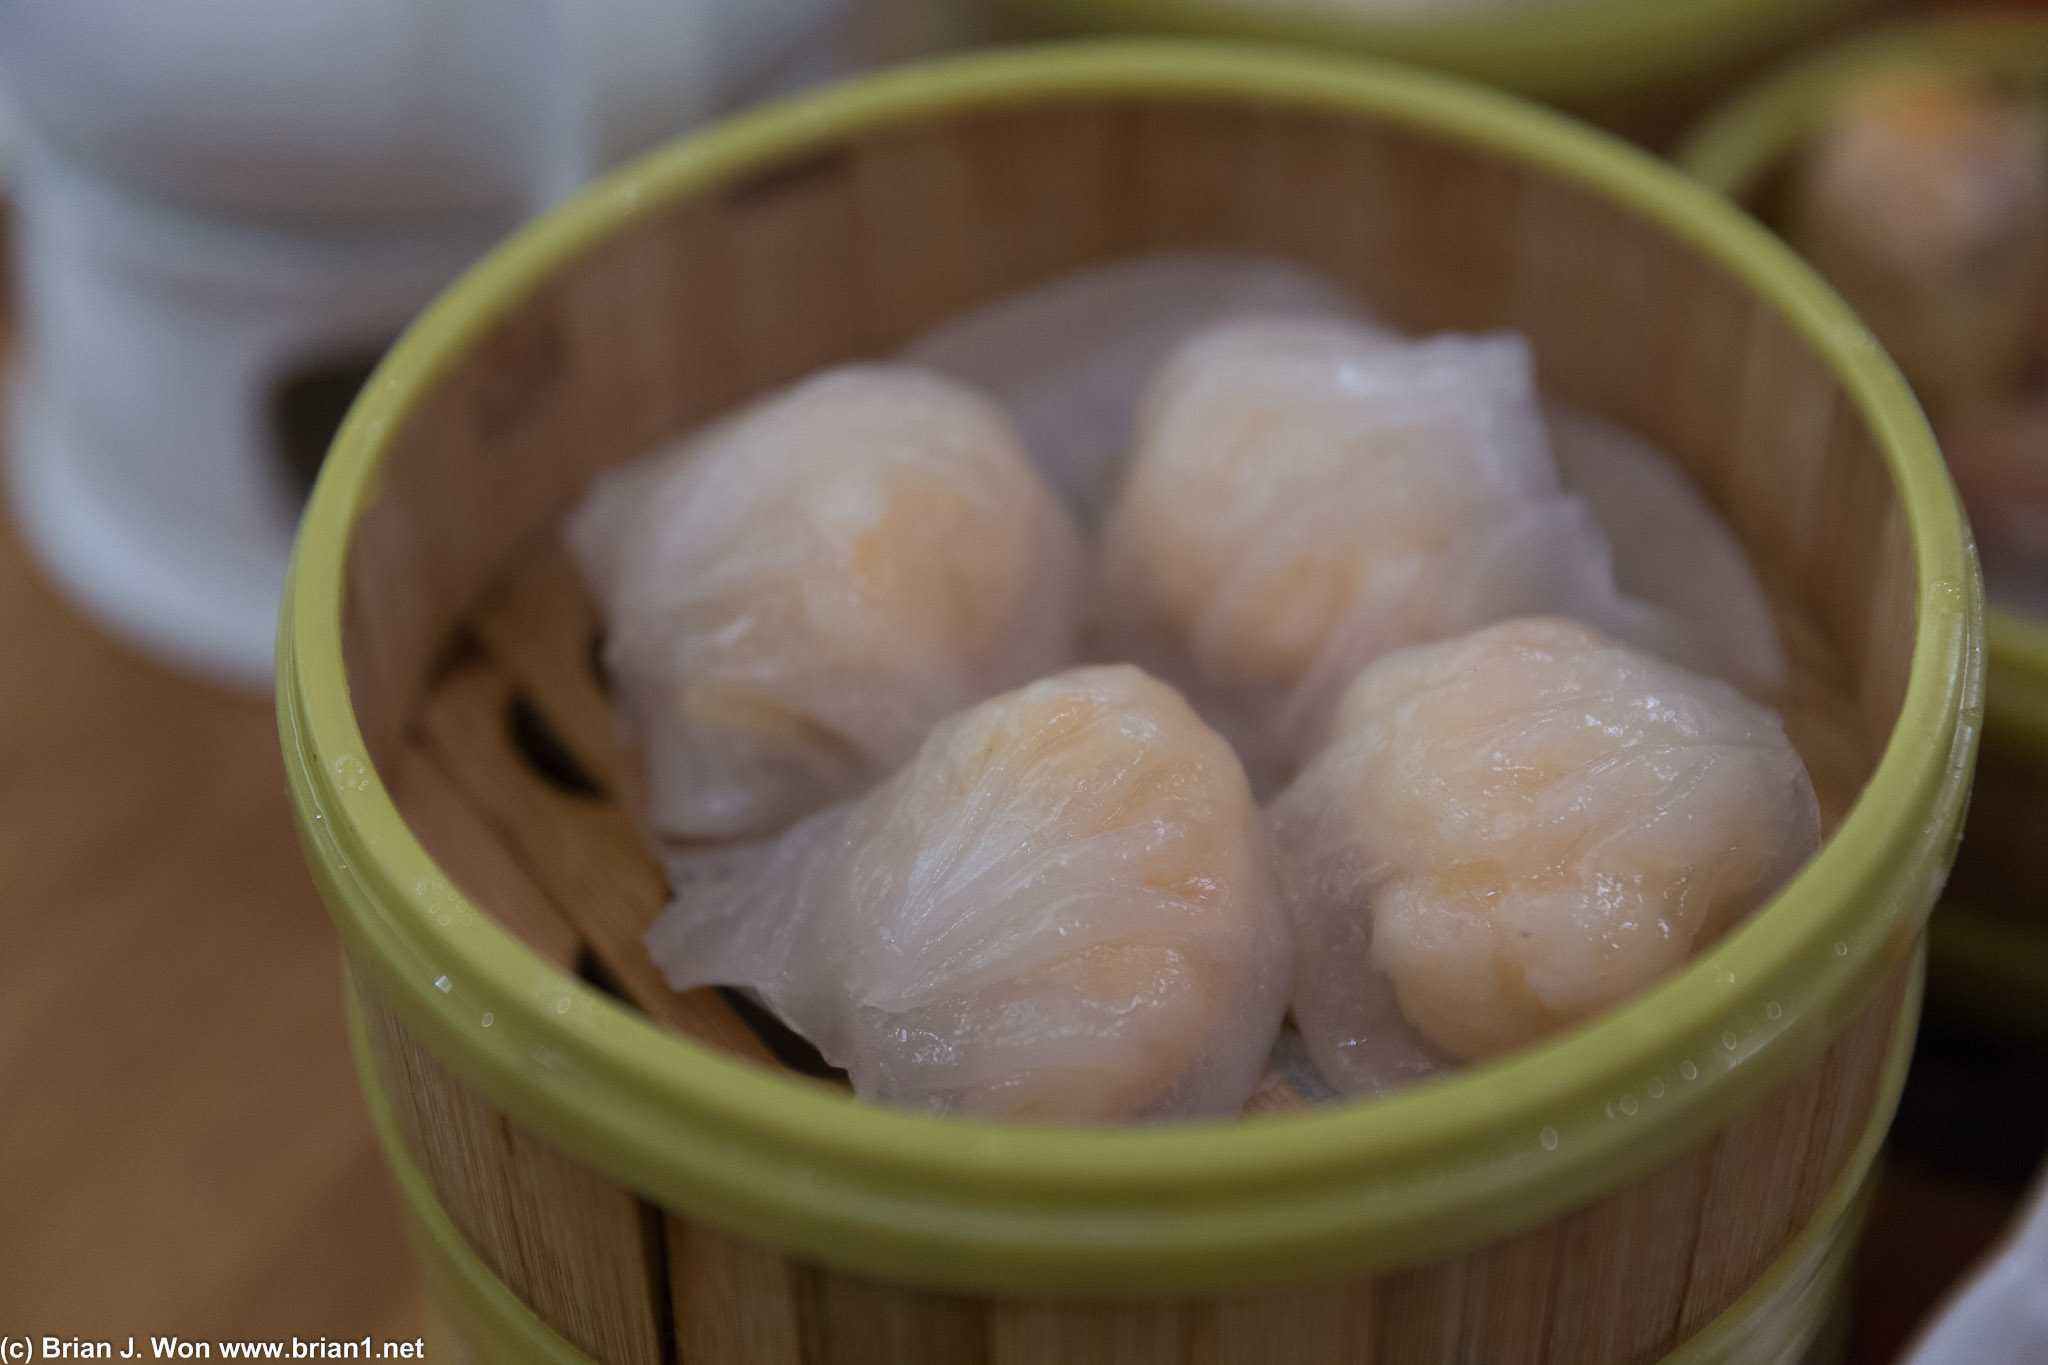 Har gow were almost perfect.